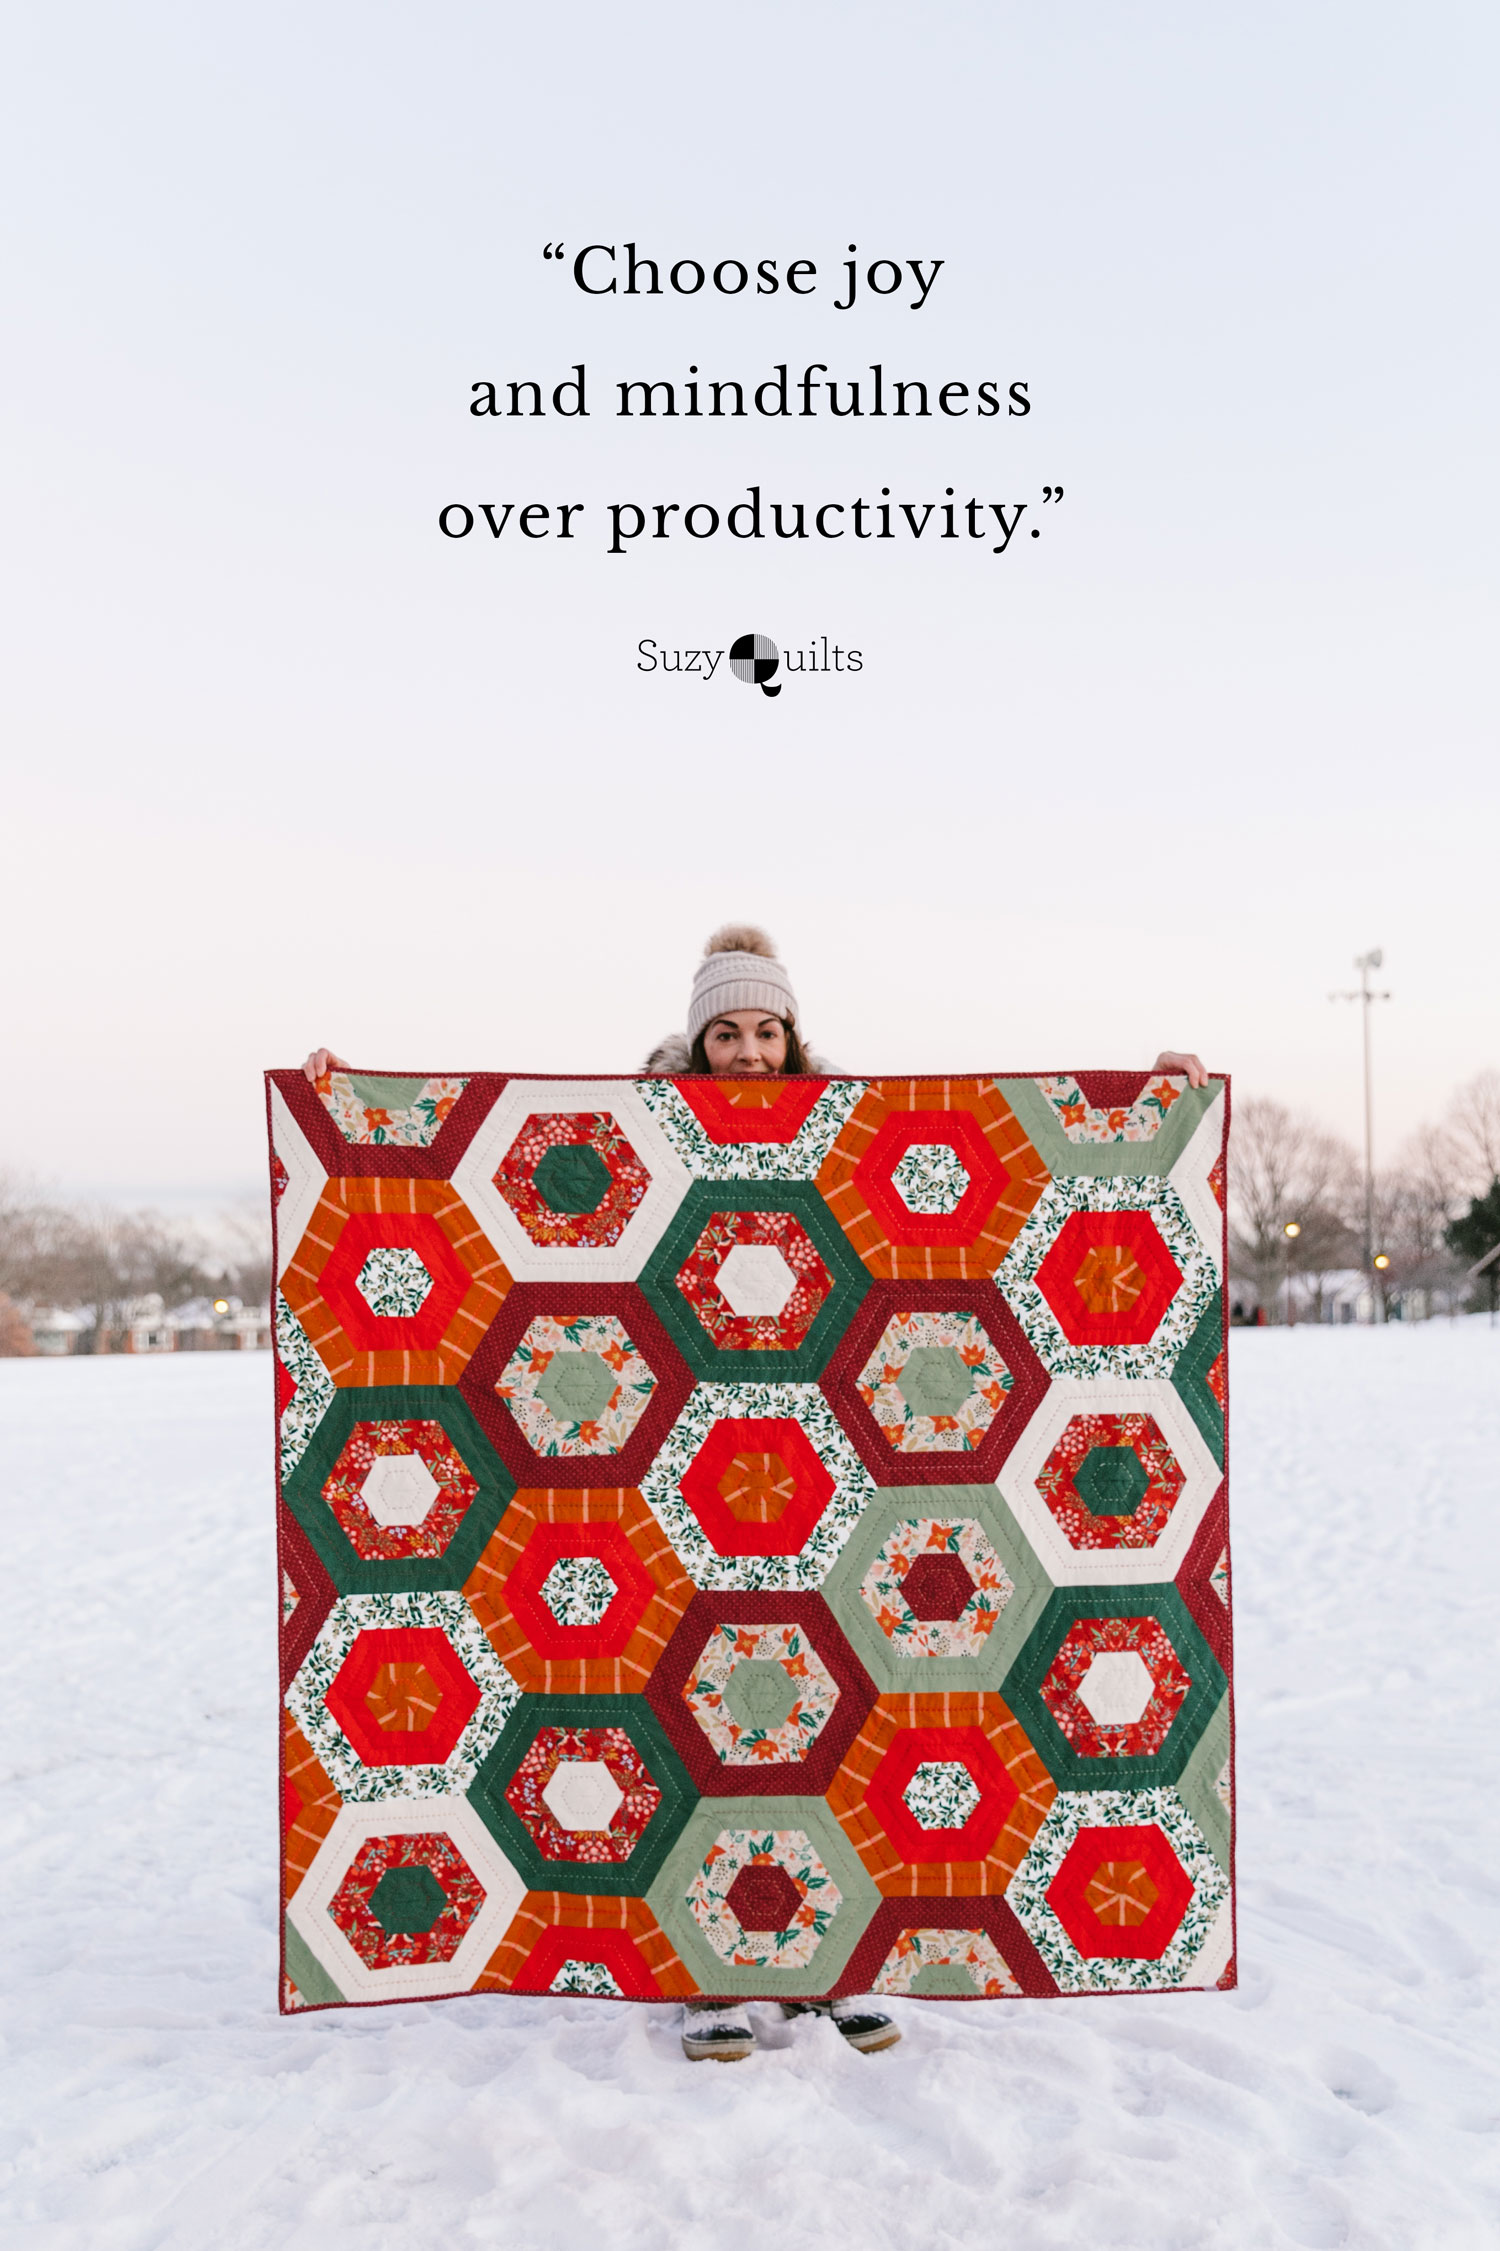 Use these 6 Steps to Mindful Making to help you stay excited and joyful to make and create through sewing, crafting or even cooking! suzyquilts.com